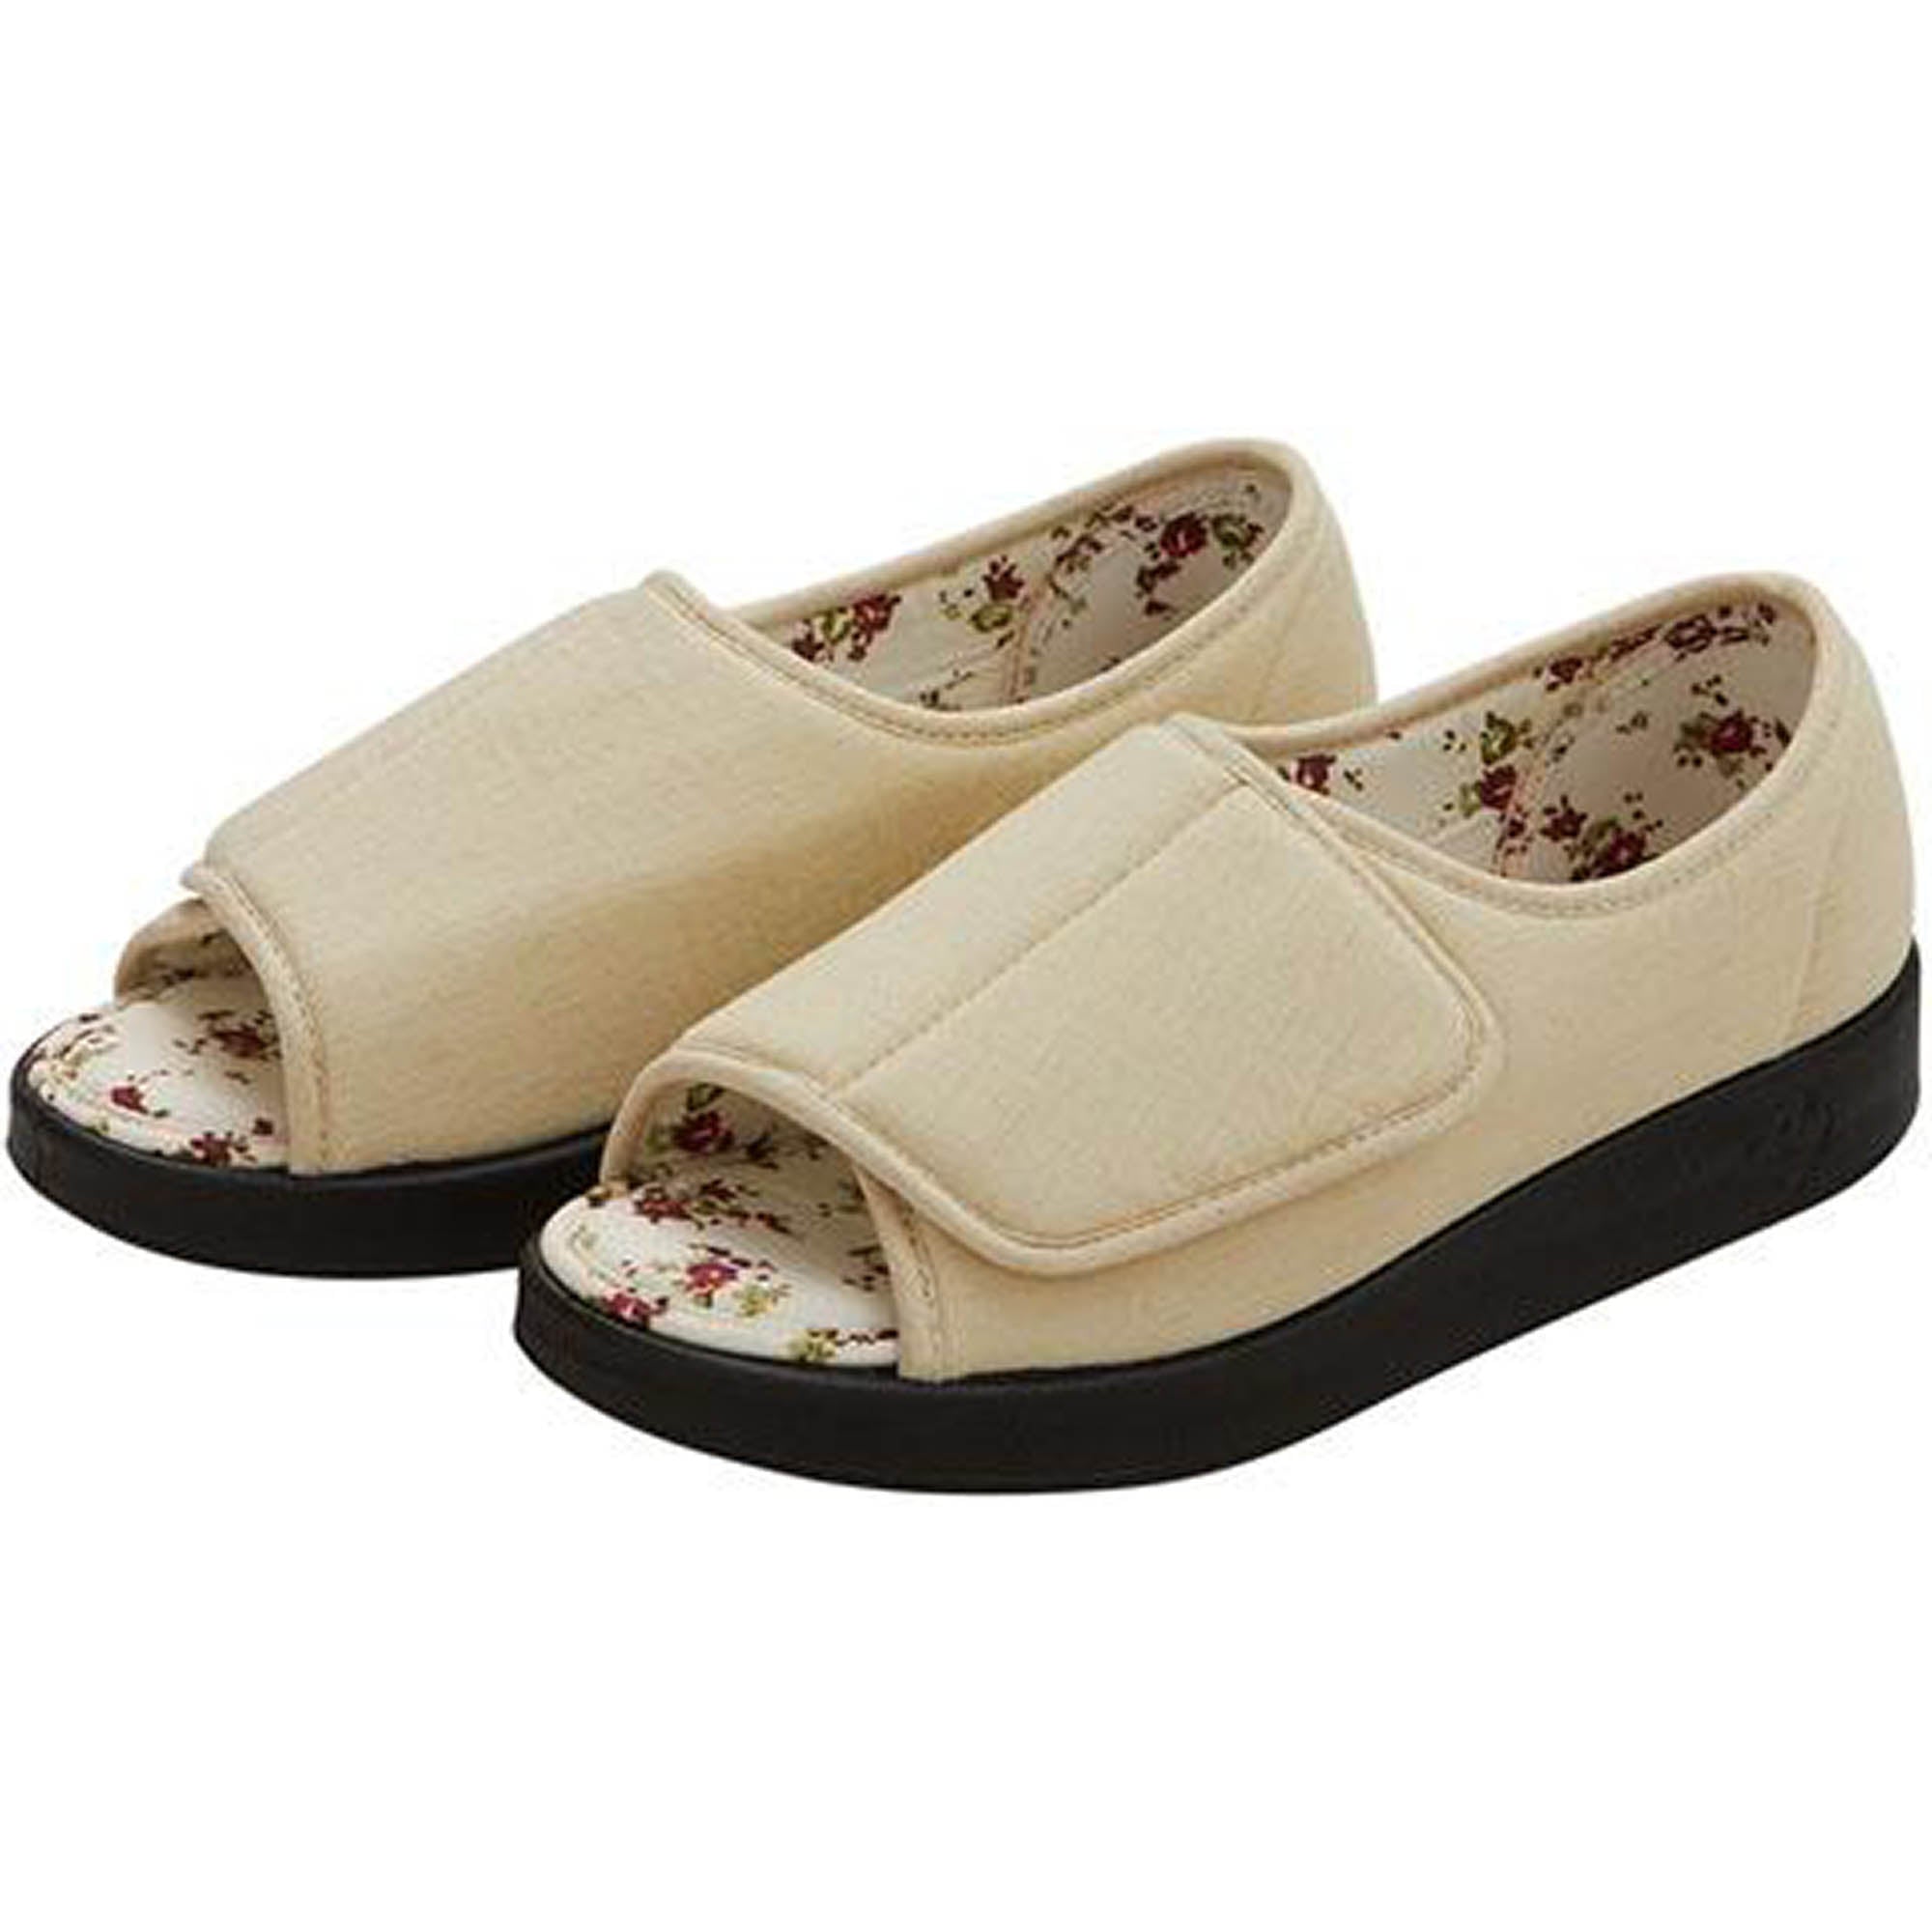 Silverts Women's Extra Wide Open-Toed Shoes - Misty Rose - 10